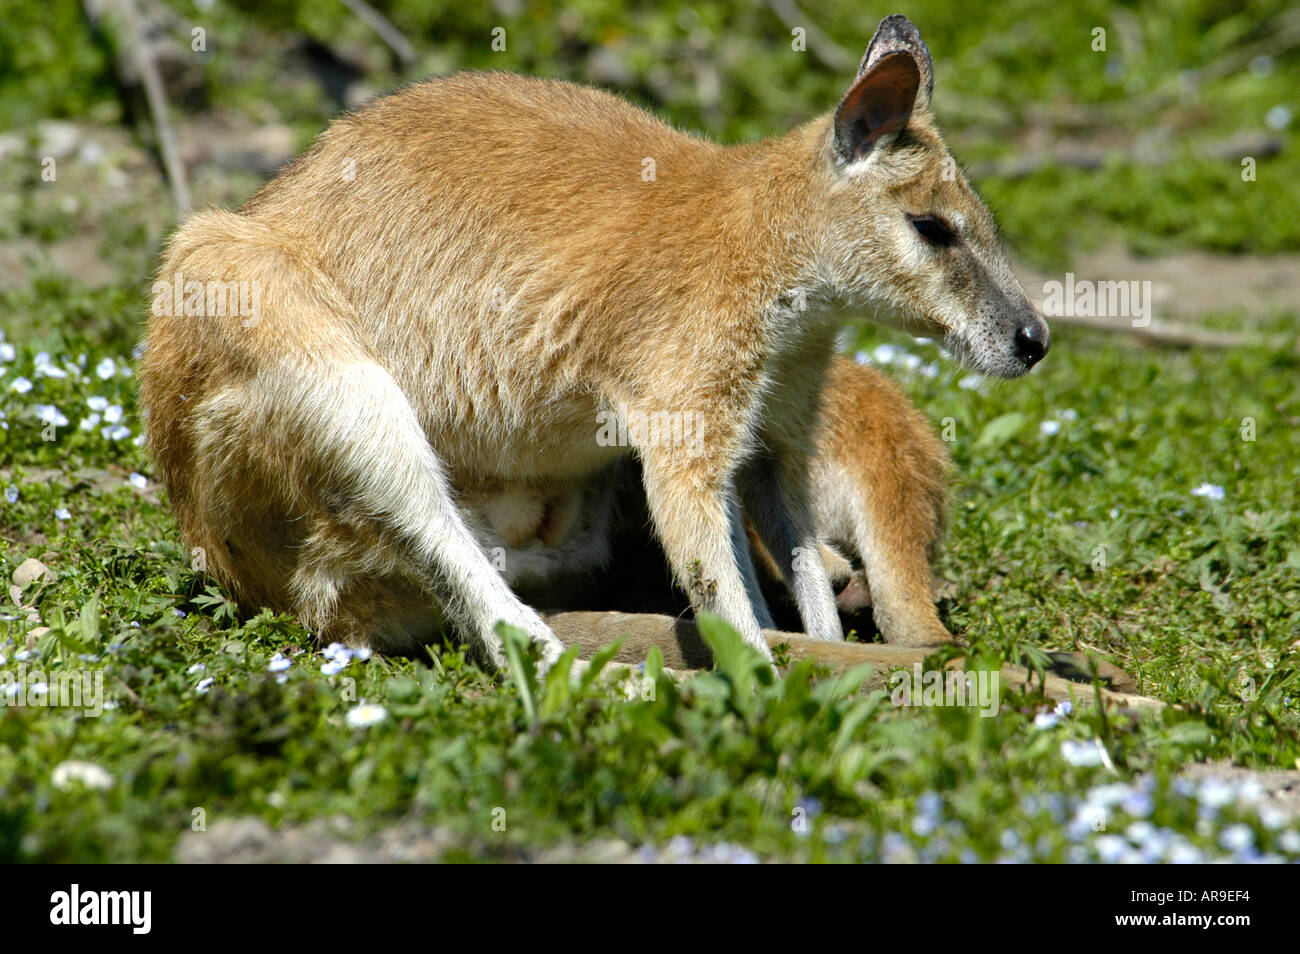 Wallaby sitting on a meadow Stock Photo